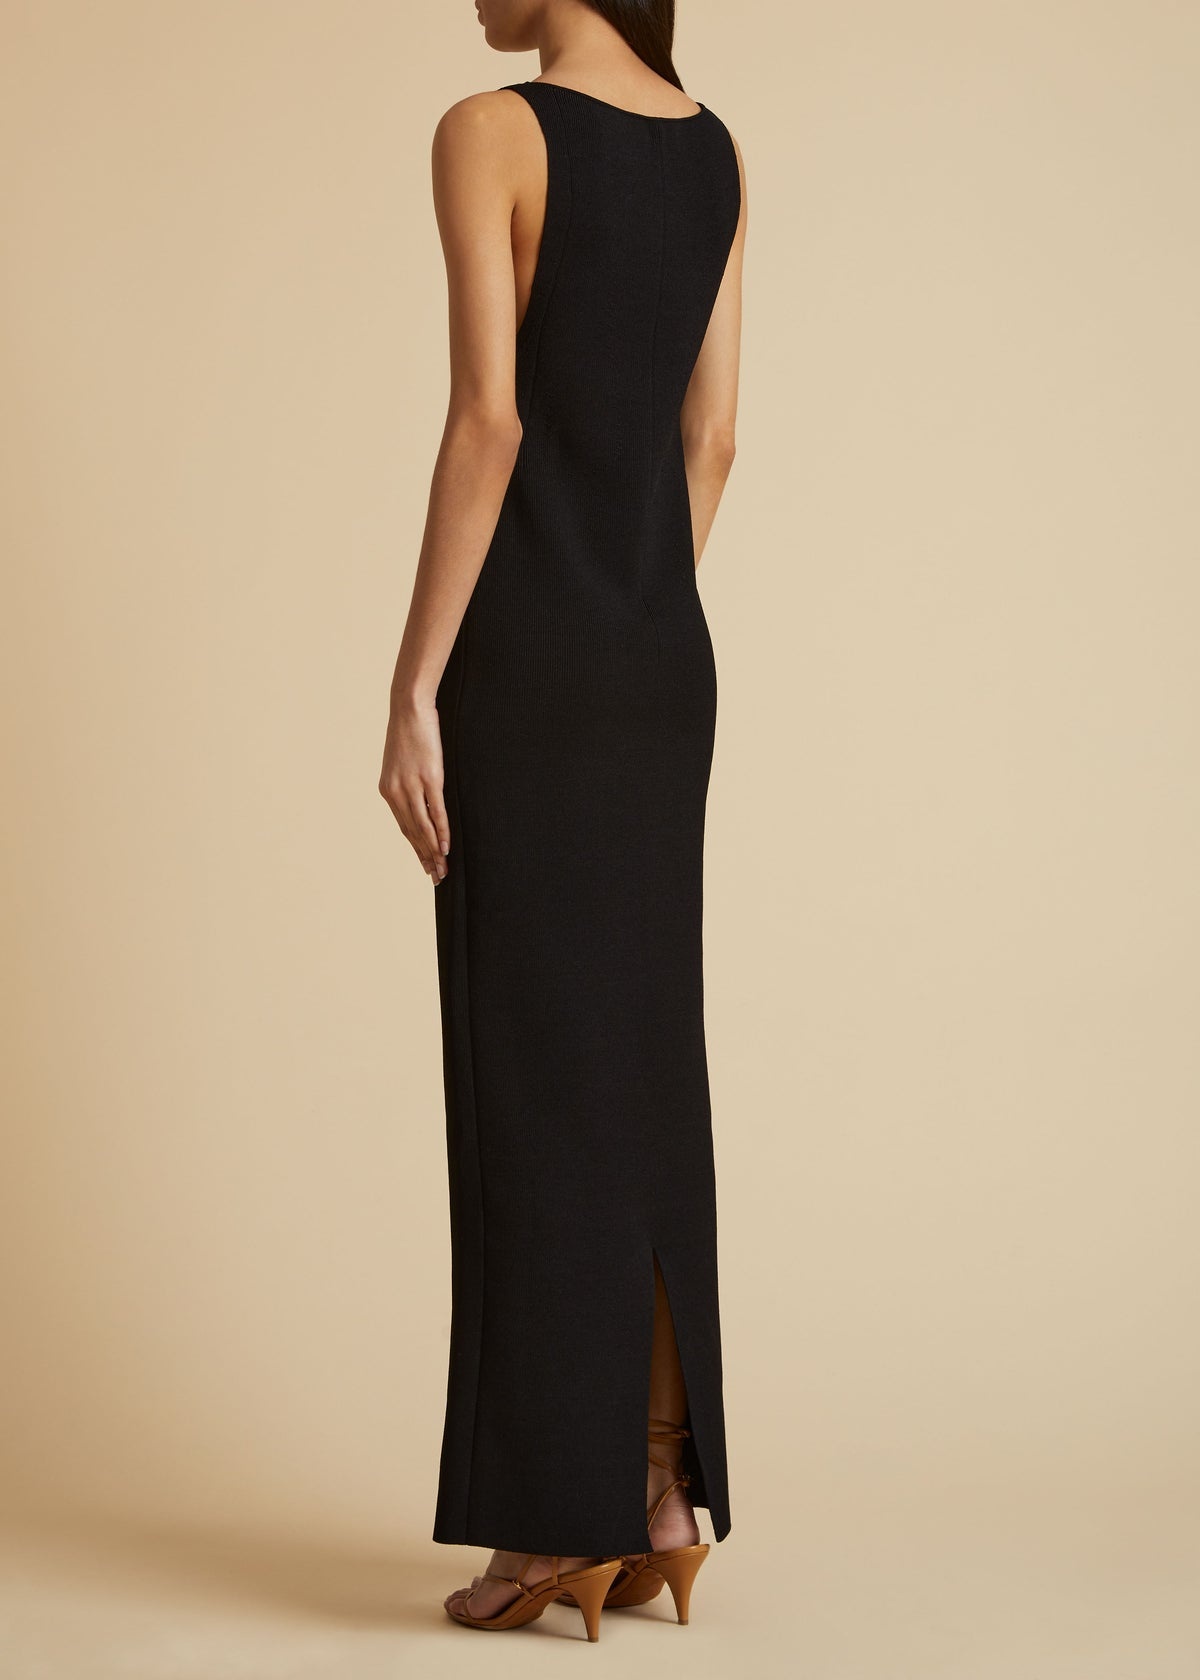 The Evelyn Dress in Black - 3